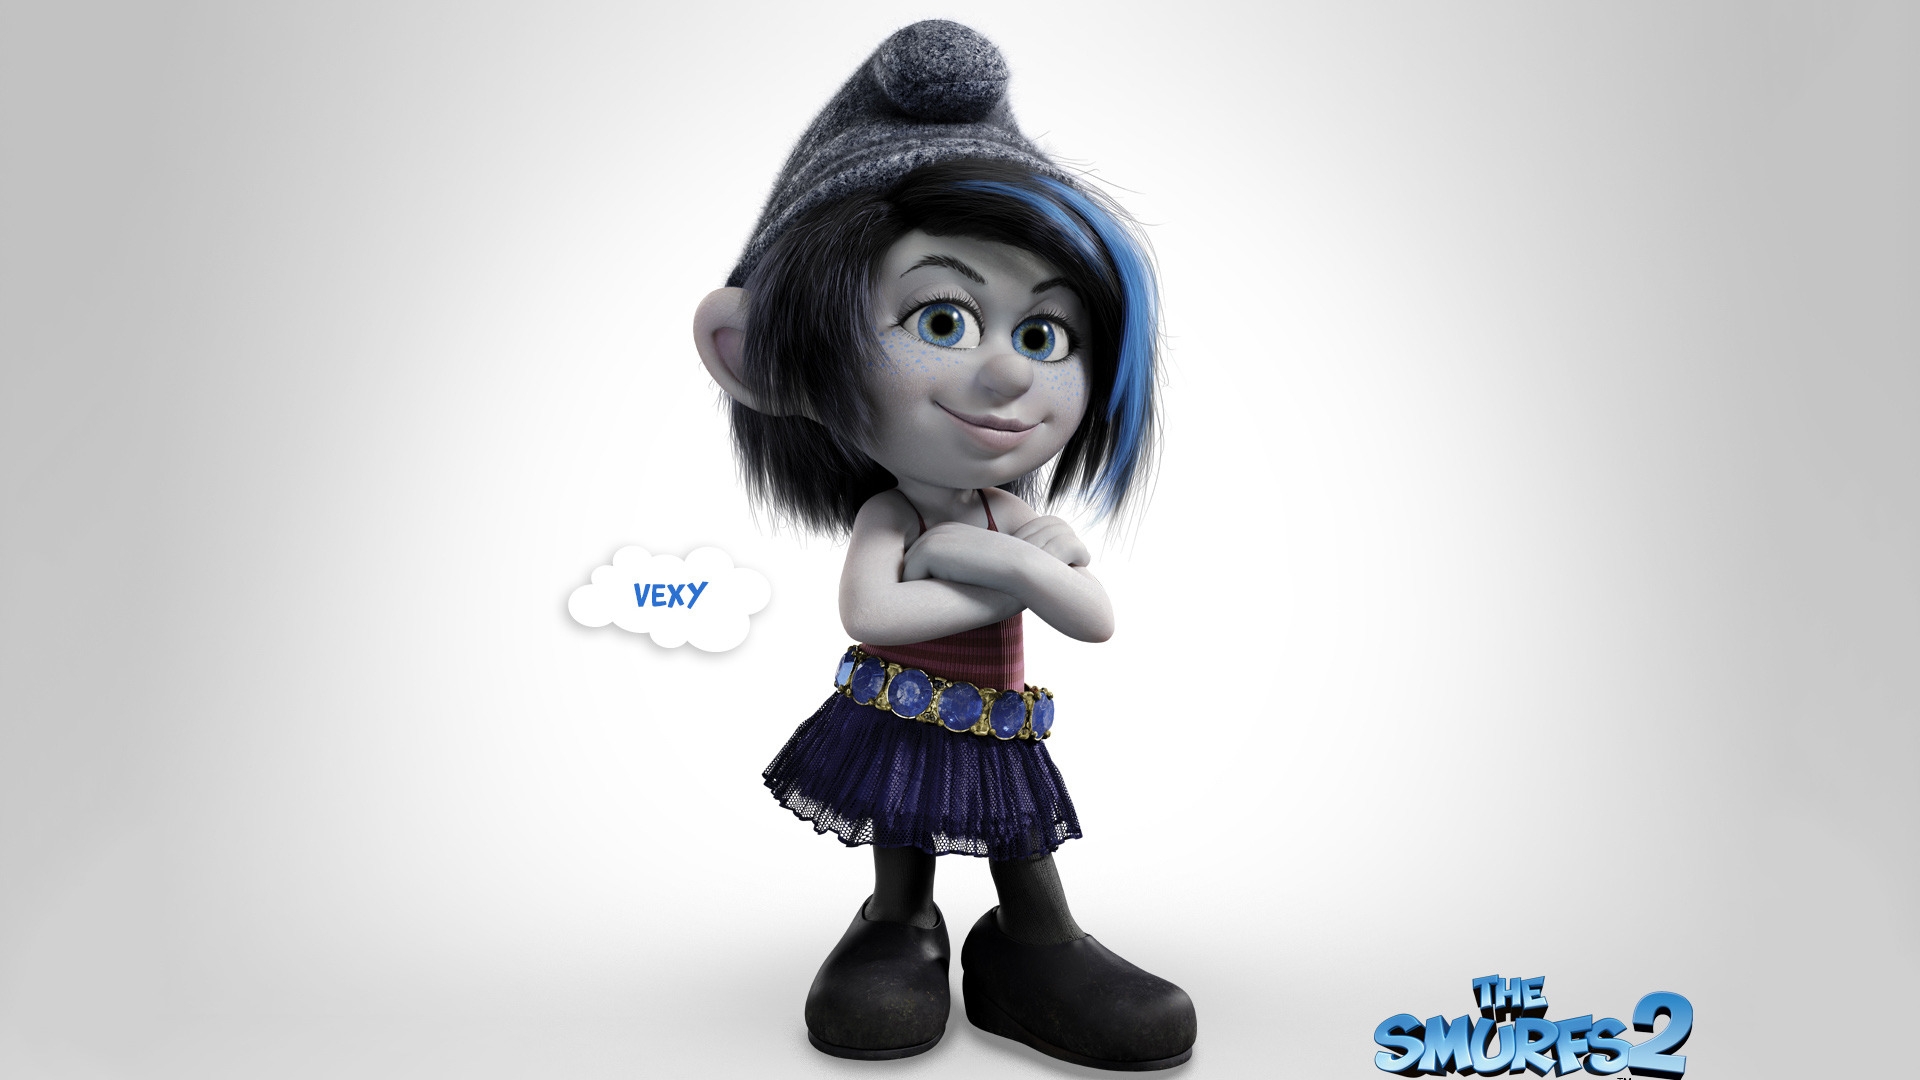 Vexy The Smurfs 2 for 1920 x 1080 HDTV 1080p resolution